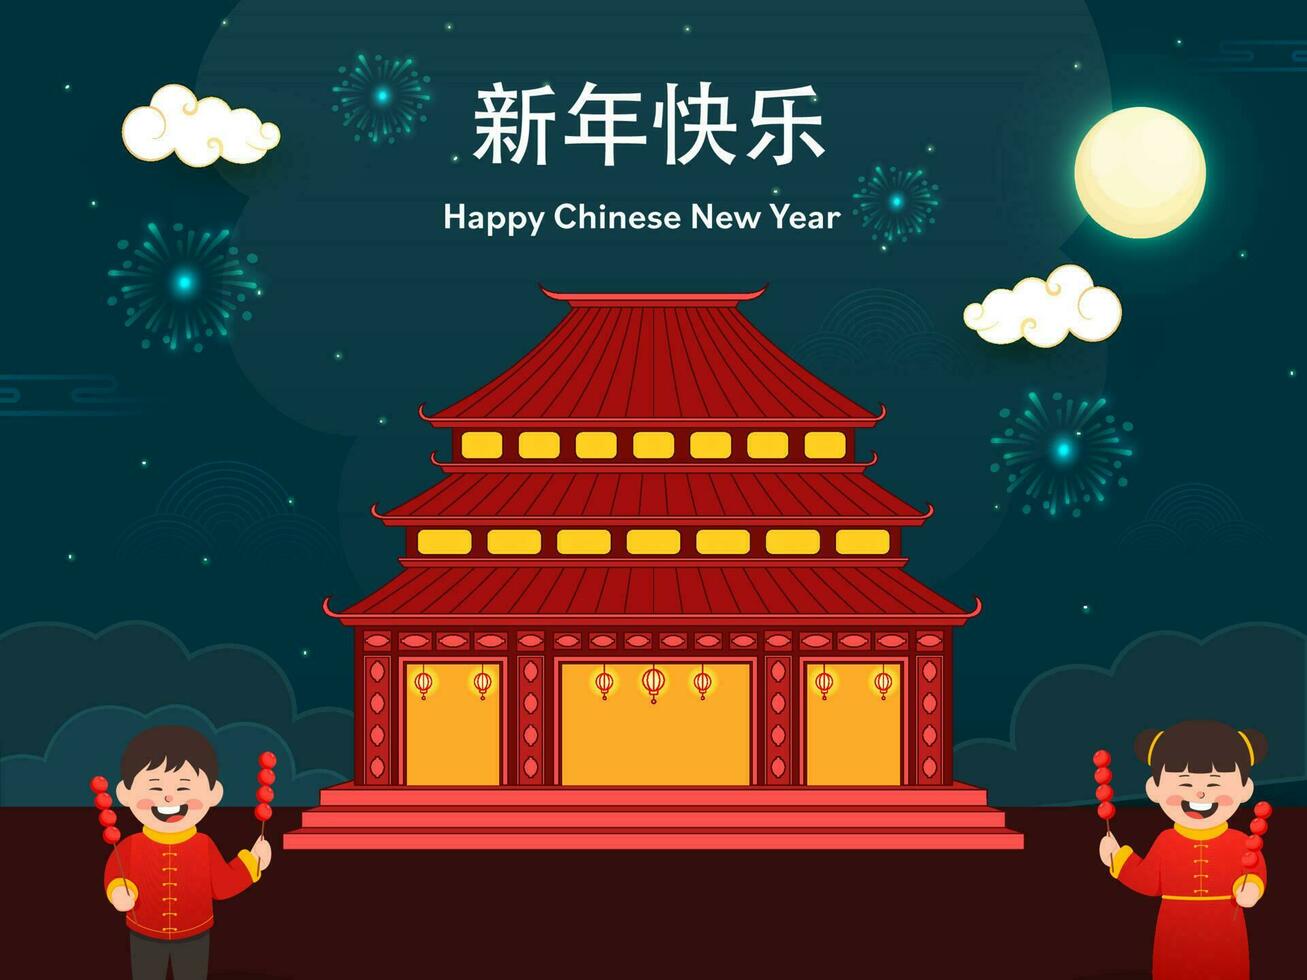 Mandarin Text Of Happy Chinese New Year With Asian House Or Temple, Cheerful Kids Holding Tanghulu Hawthorn Sticks On Full Moon Dark Teal Fireworks Background. vector